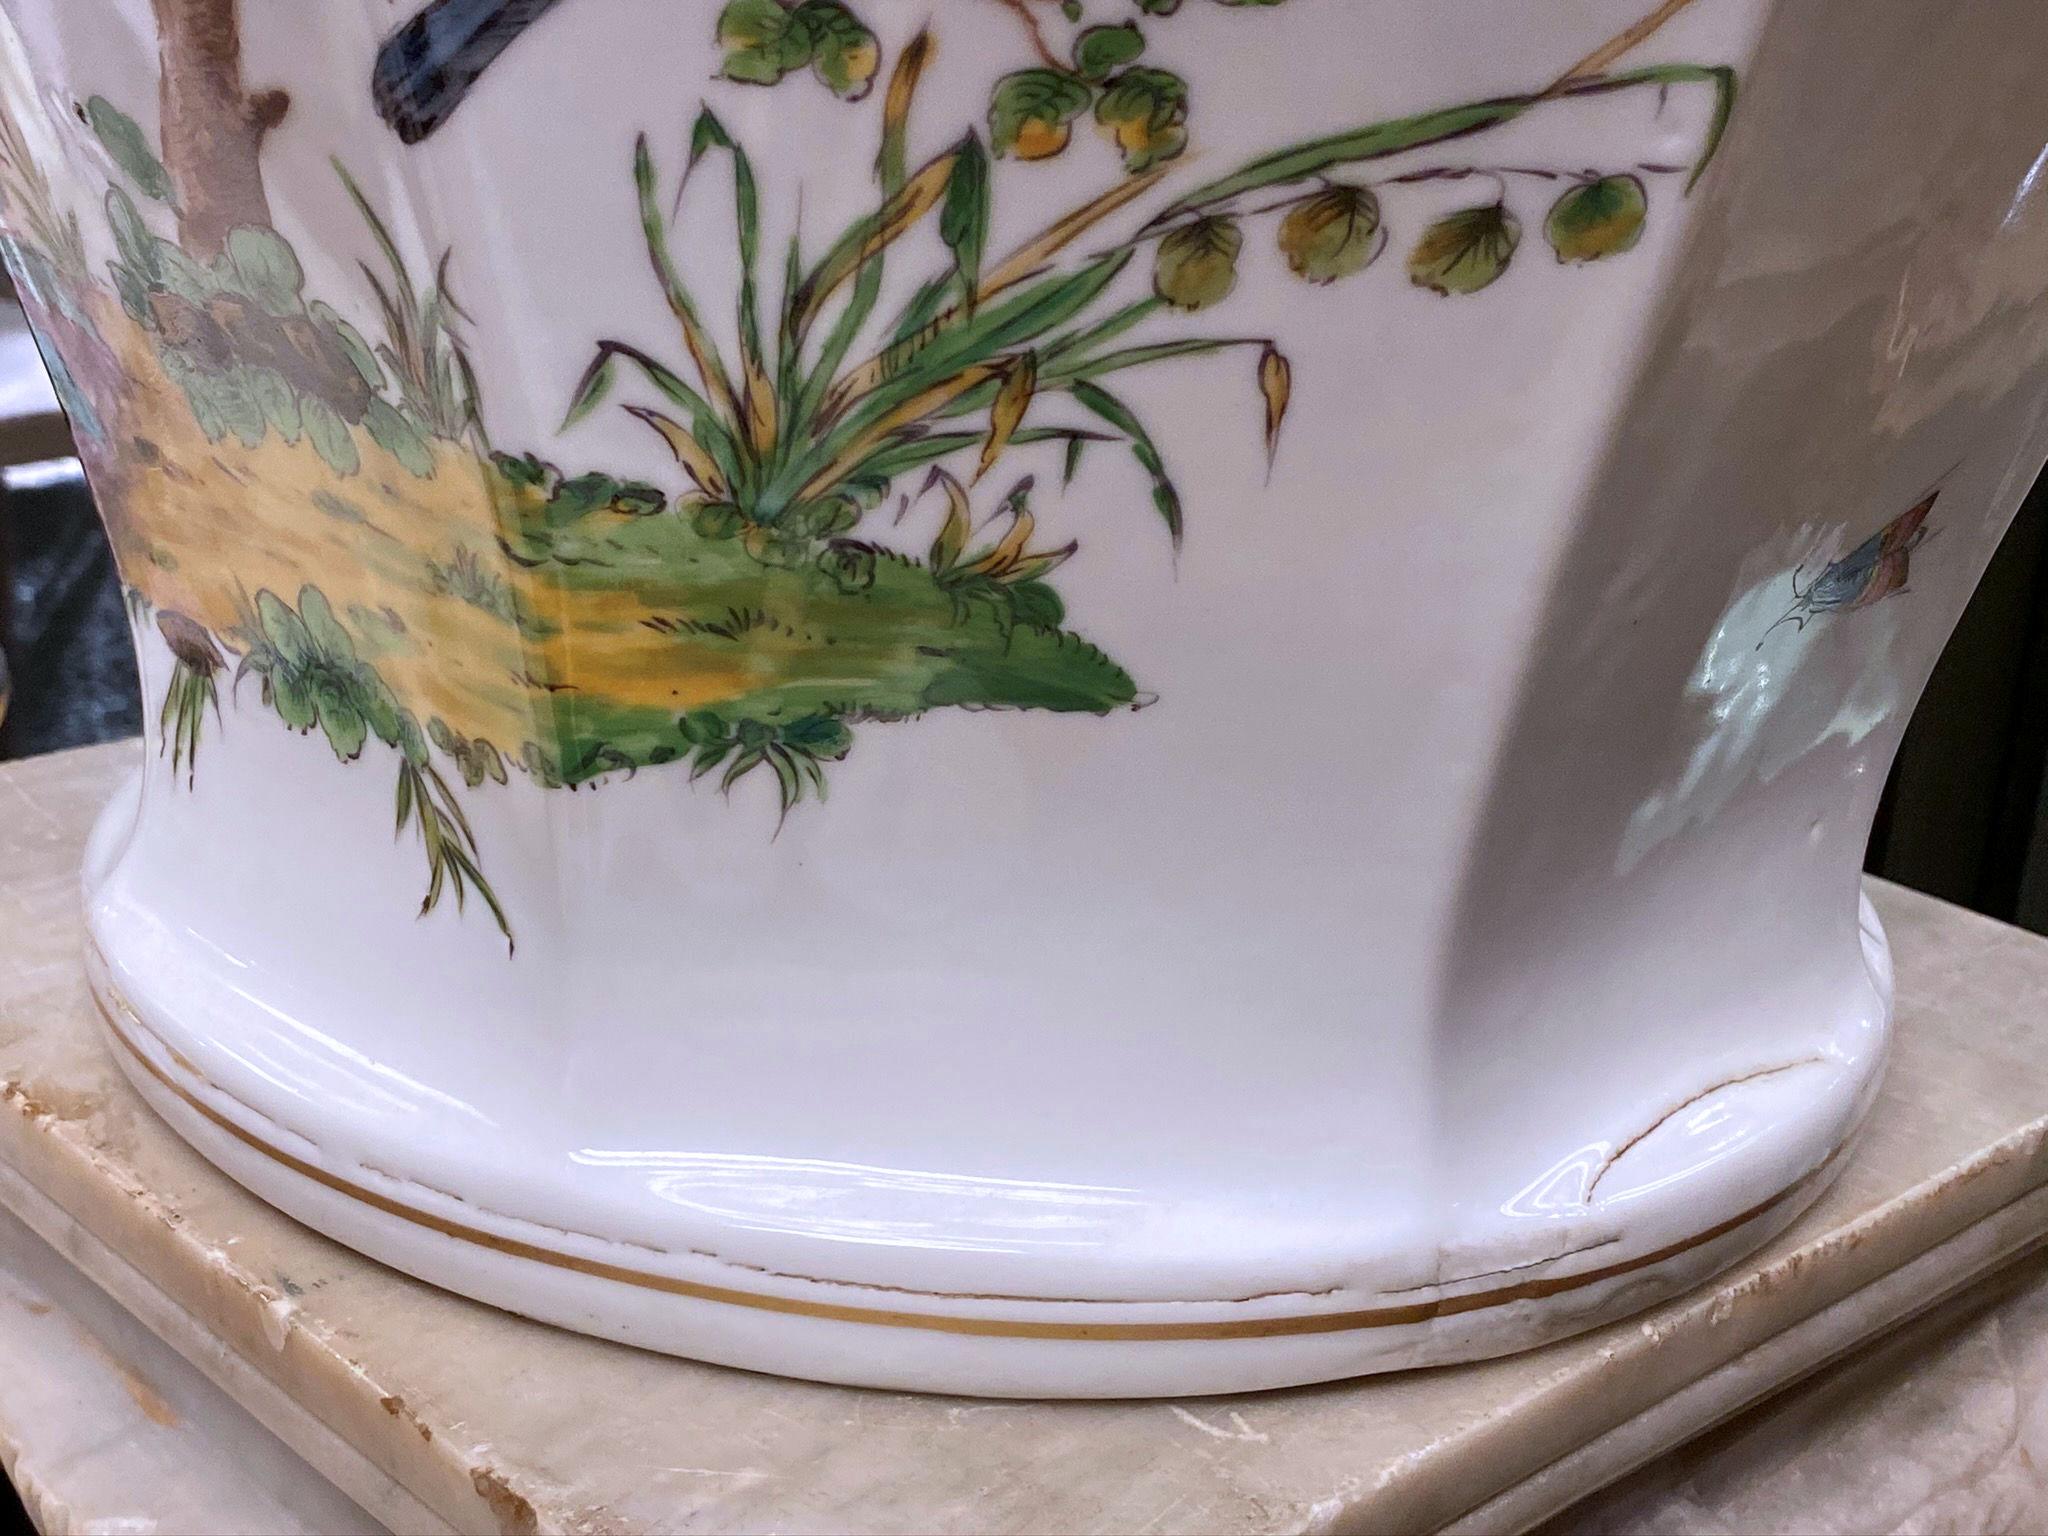 Large 19 century Ludwigsburg German porcelain vase and cover, signed, with hand-painted with butterflies and perched songbirds.